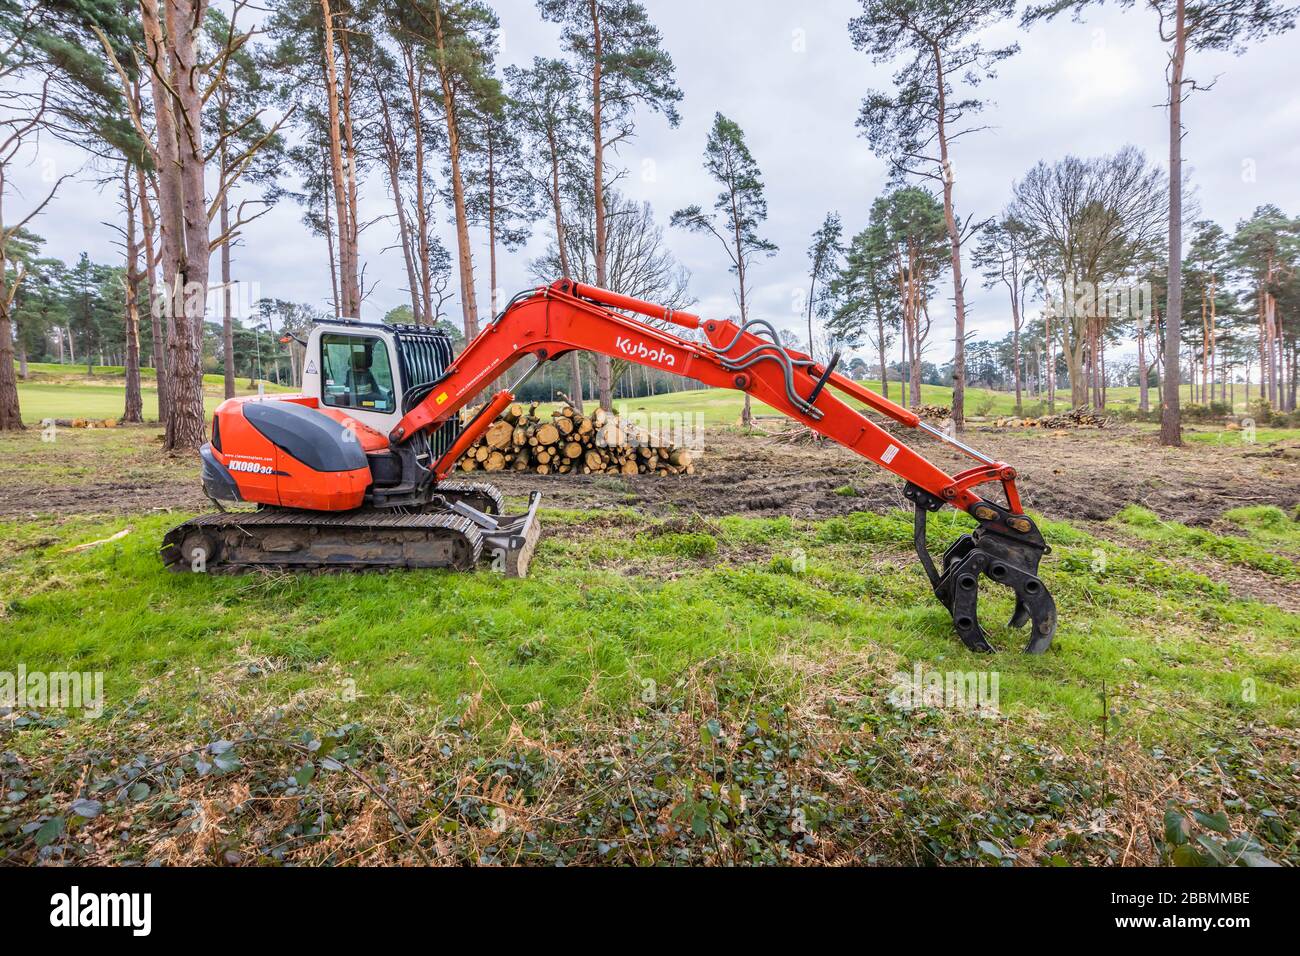 KUBOTA KX080-3 mini digger, rubber tracked midi excavator being used for tree felling and logging, Surrey, south-east England Stock Photo